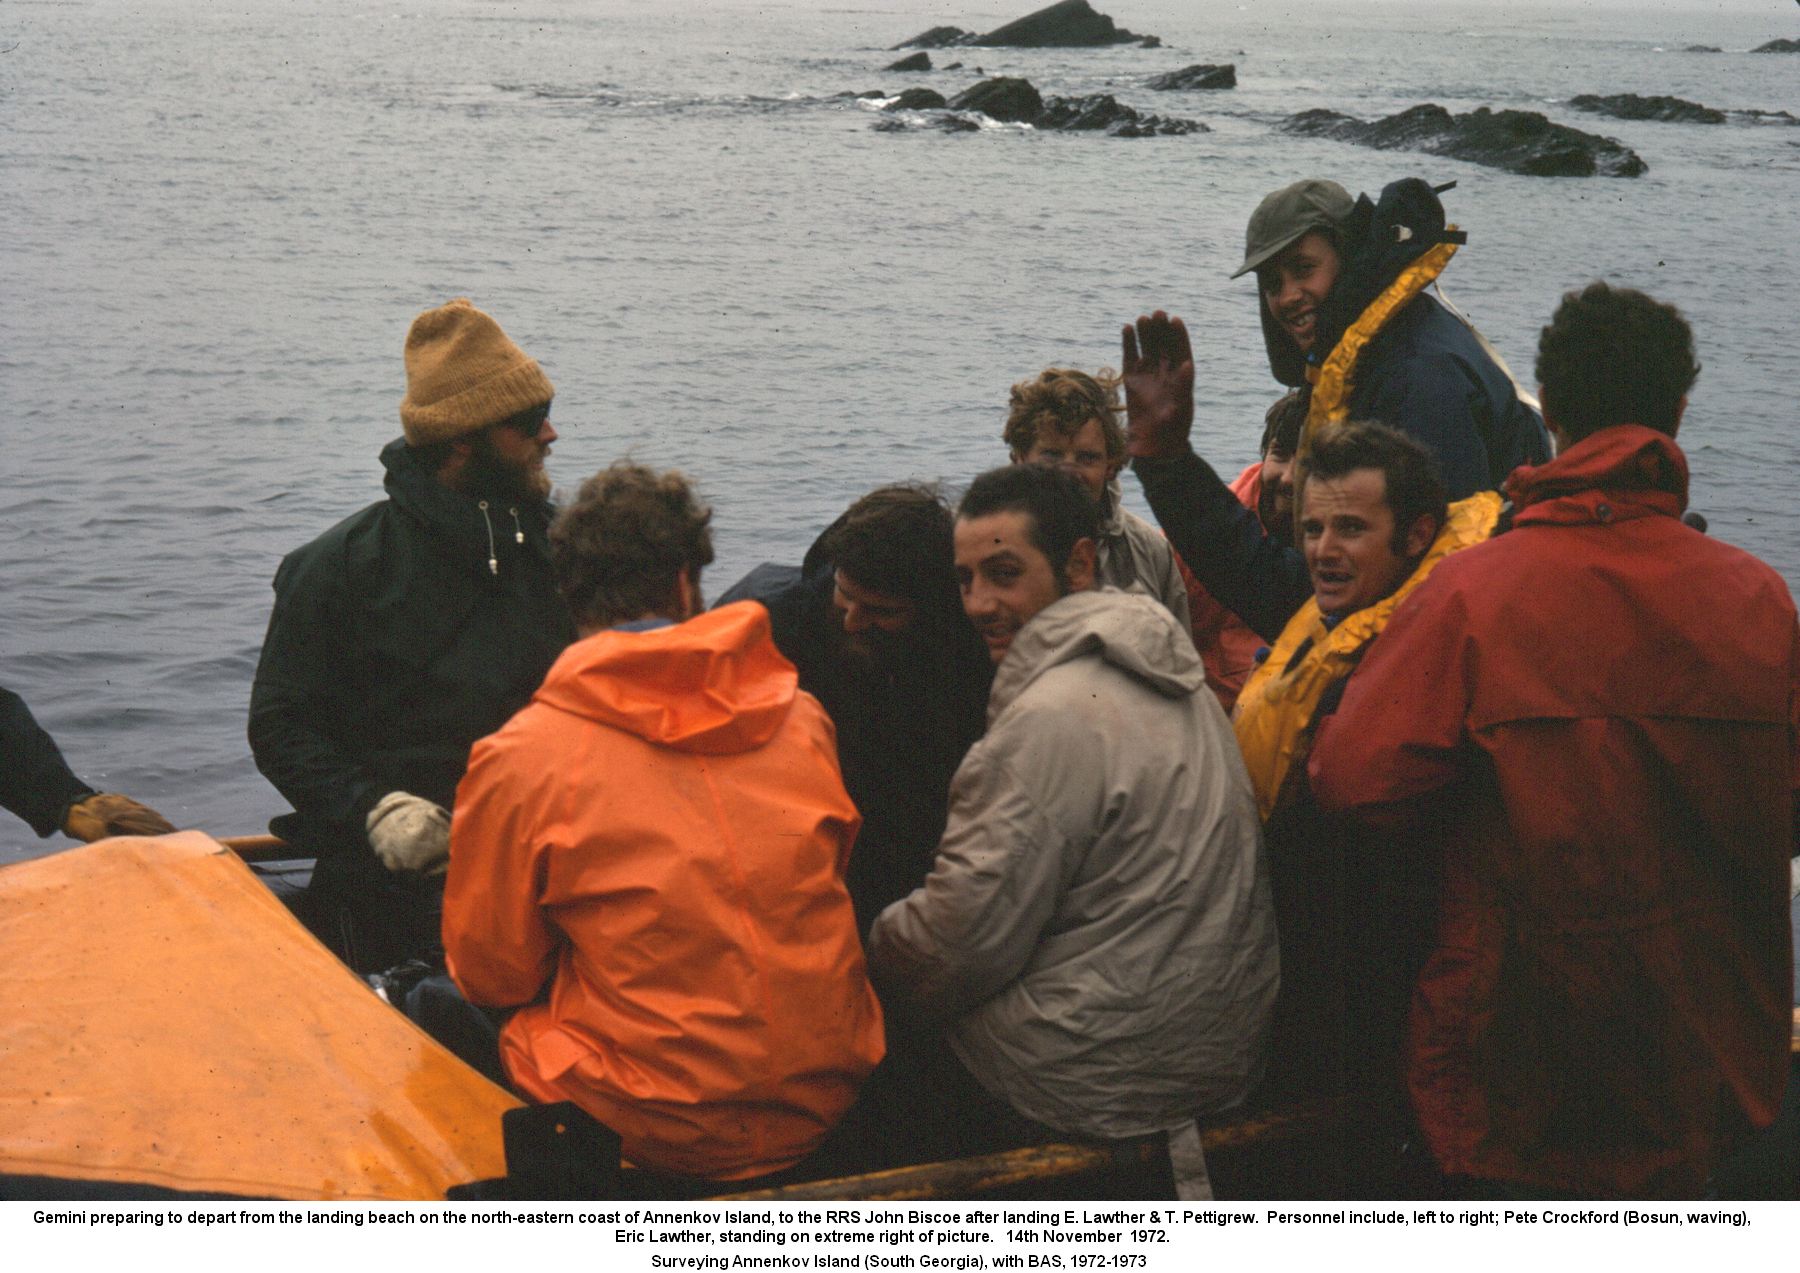 Gemini preparing to depart from the landing beach on the north-eastern coast of Annenkov Island, to the RRS John Biscoe after landing E. Lawther & T. Pettigrew.  Personnel include, left to right; Pete Crockford (Bosun, waving),
Eric Lawther, standing on extreme right of picture. 14th November  1972.